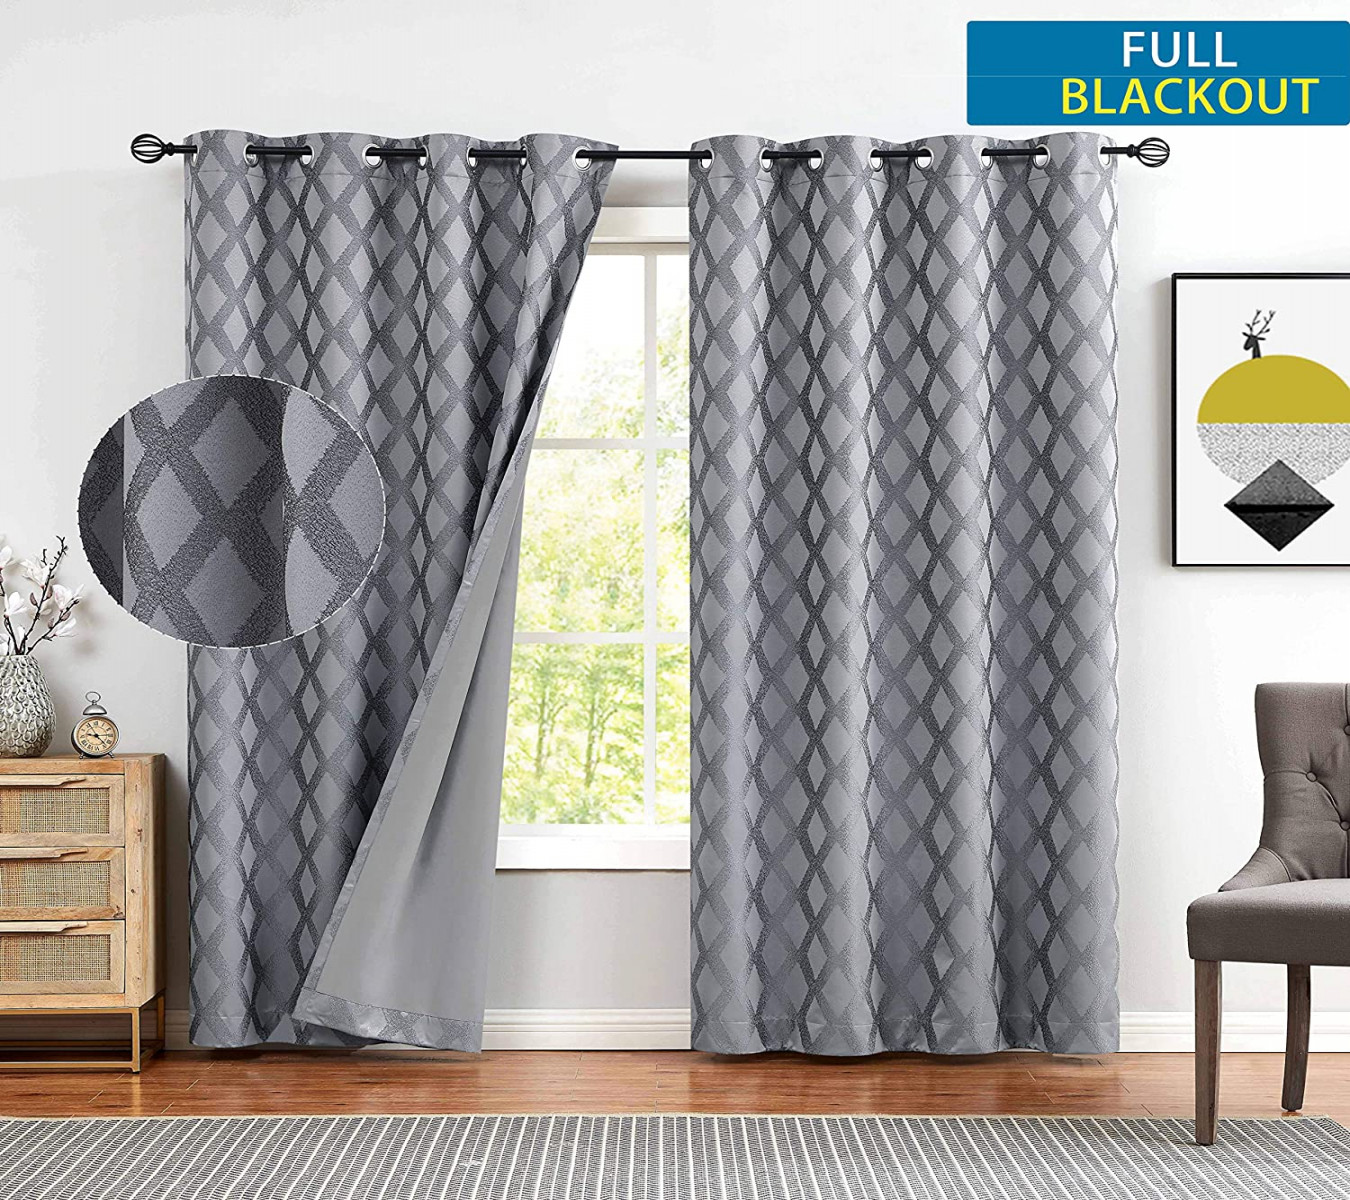 Grey Curtains % Blackout Curtains for Bedroom Geometric Pattern Window  Panels " Length Room Blackout Curtains for Living Room  Panels 5" W x